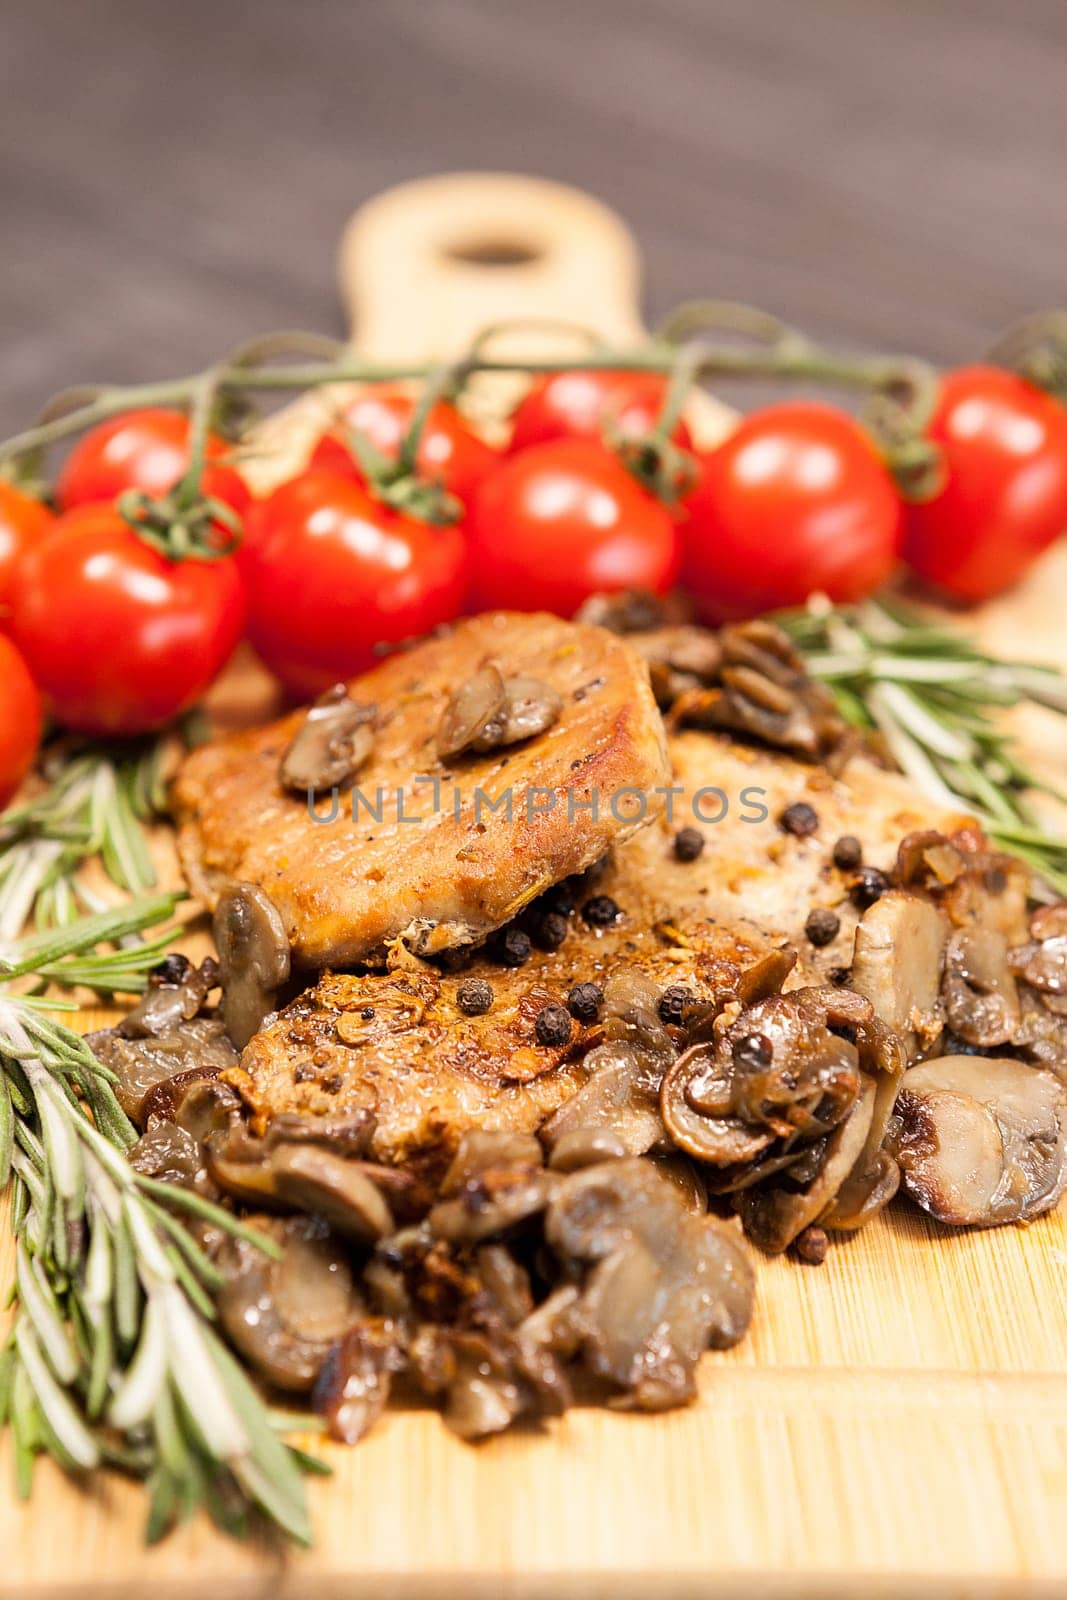 Close up viewon grilled pork and mushrooms next to cherry tomatoes